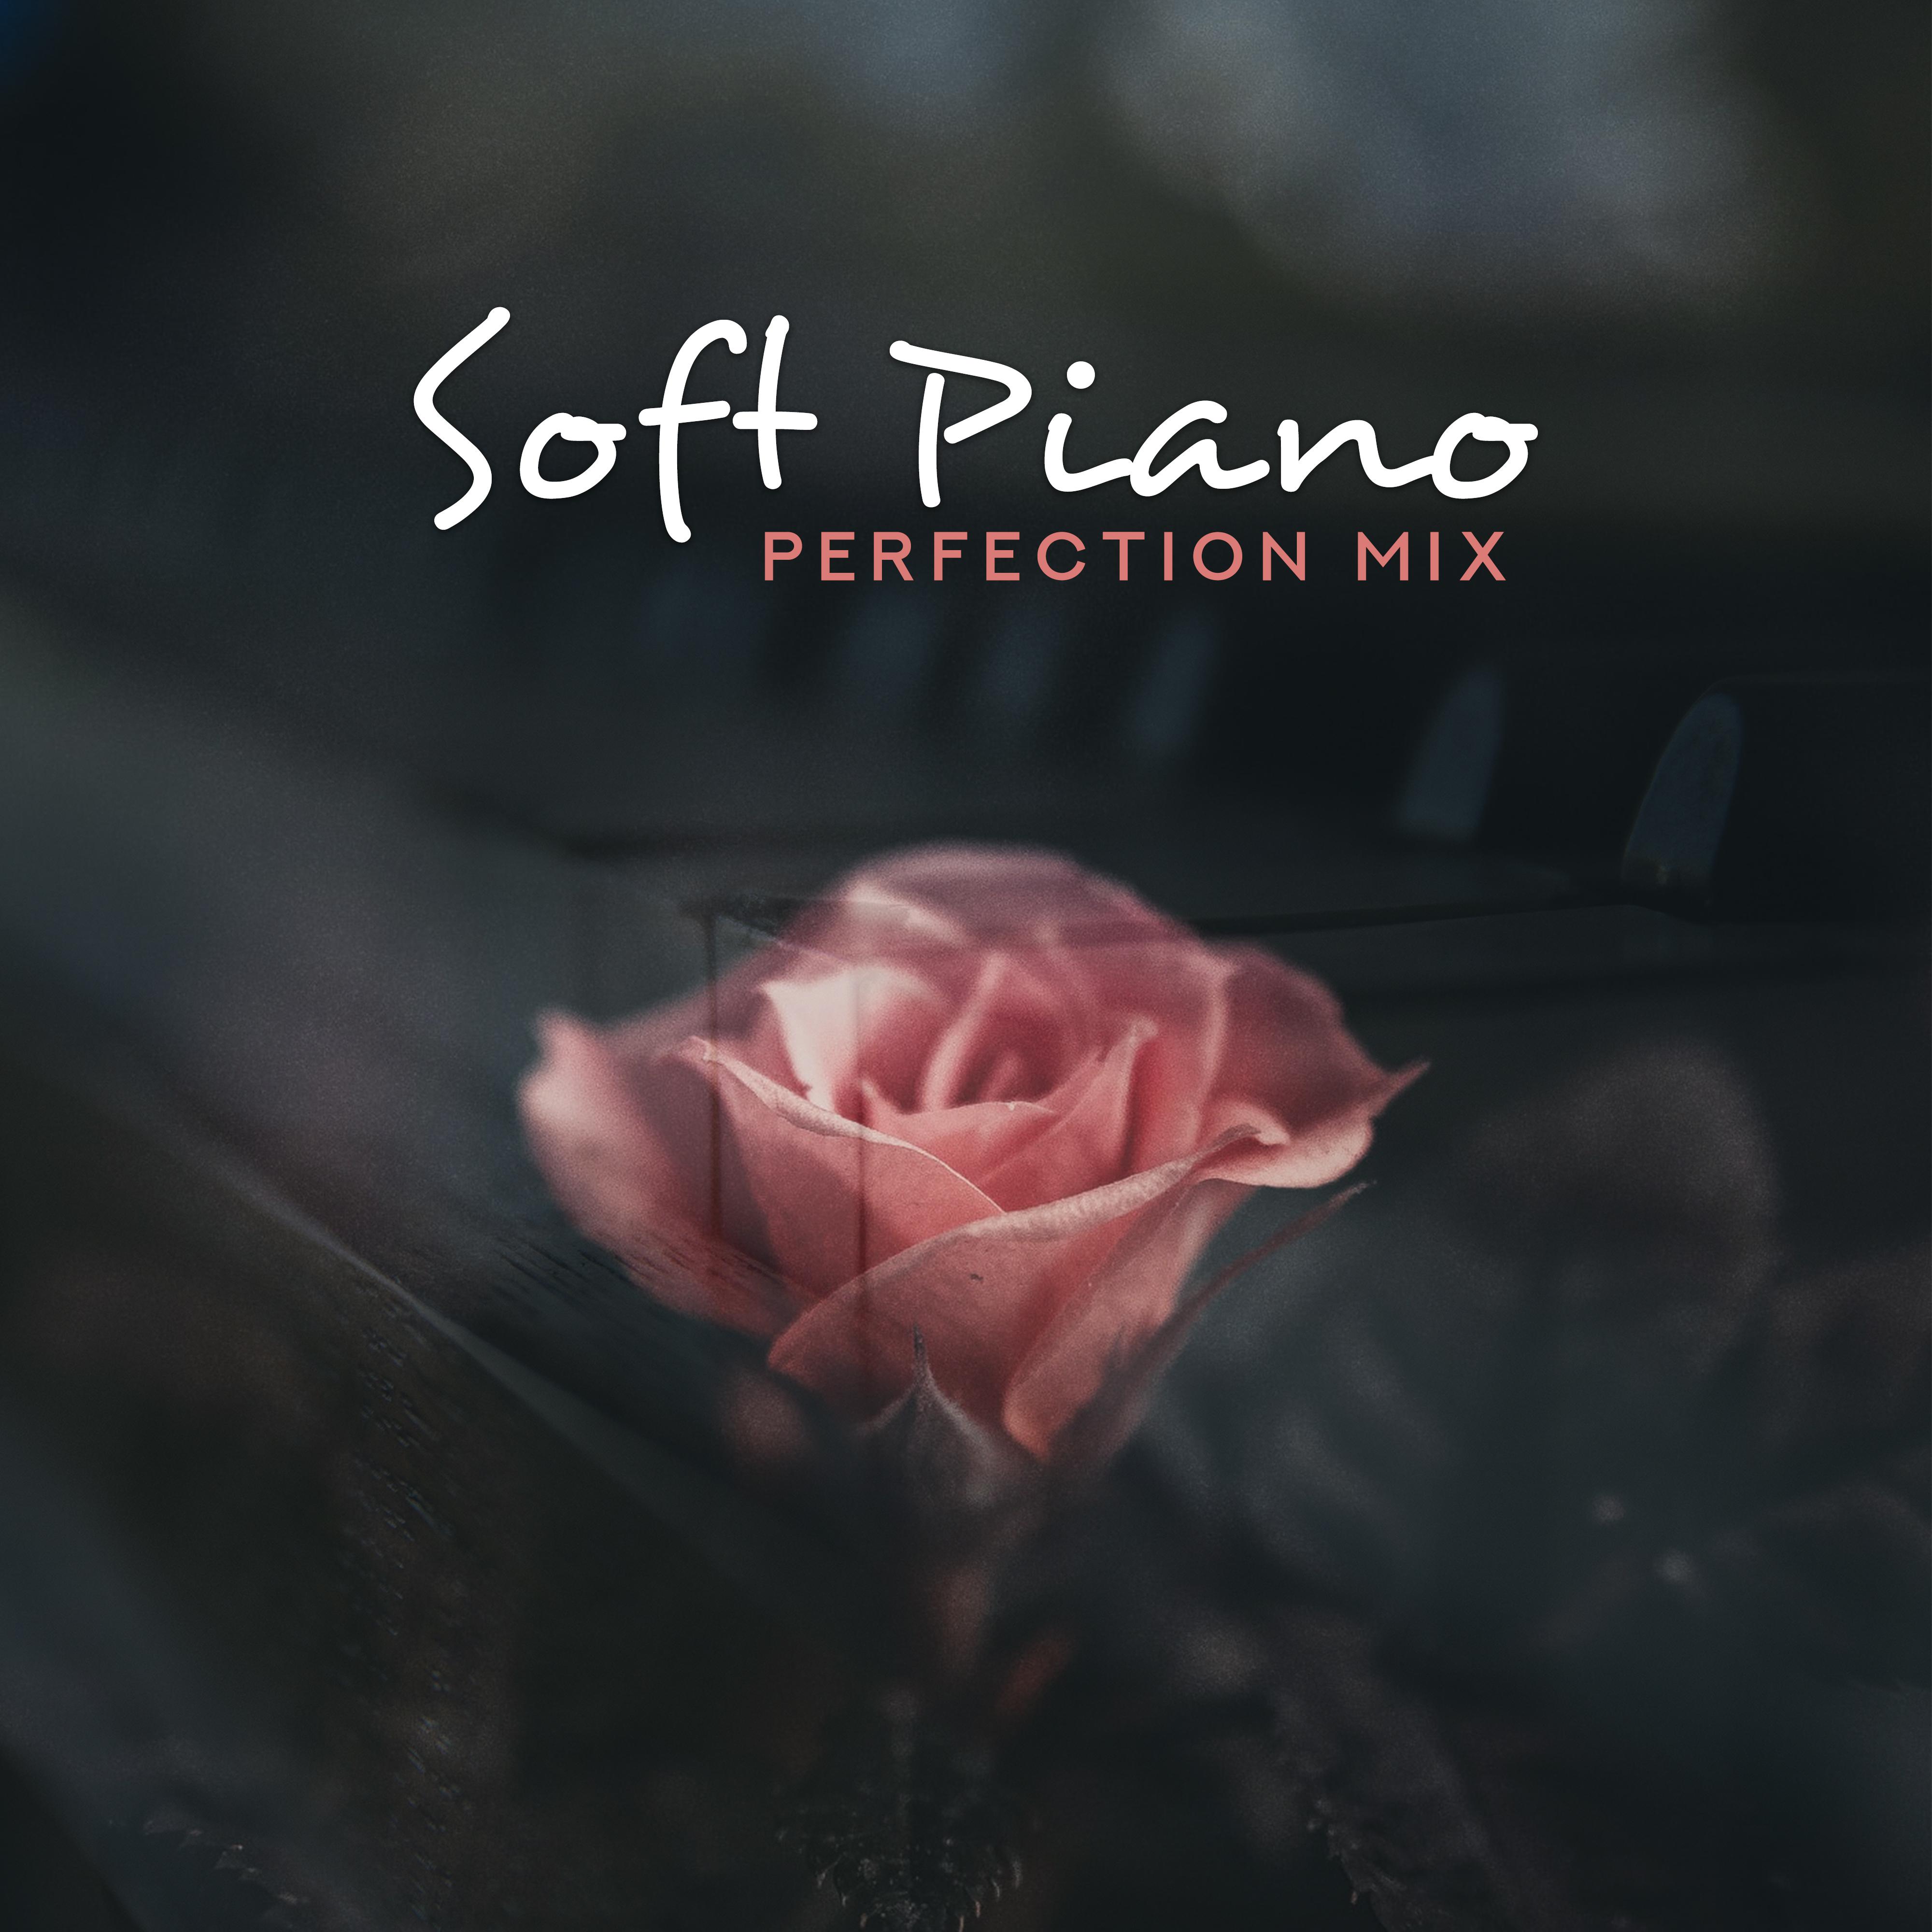 Soft Piano Perfection Mix: 2019 New Piano Jazz Music, Sensual Melodies, Delicate Sounds of Piano, Songs for Romantic Time Spending or Relaxing at Home